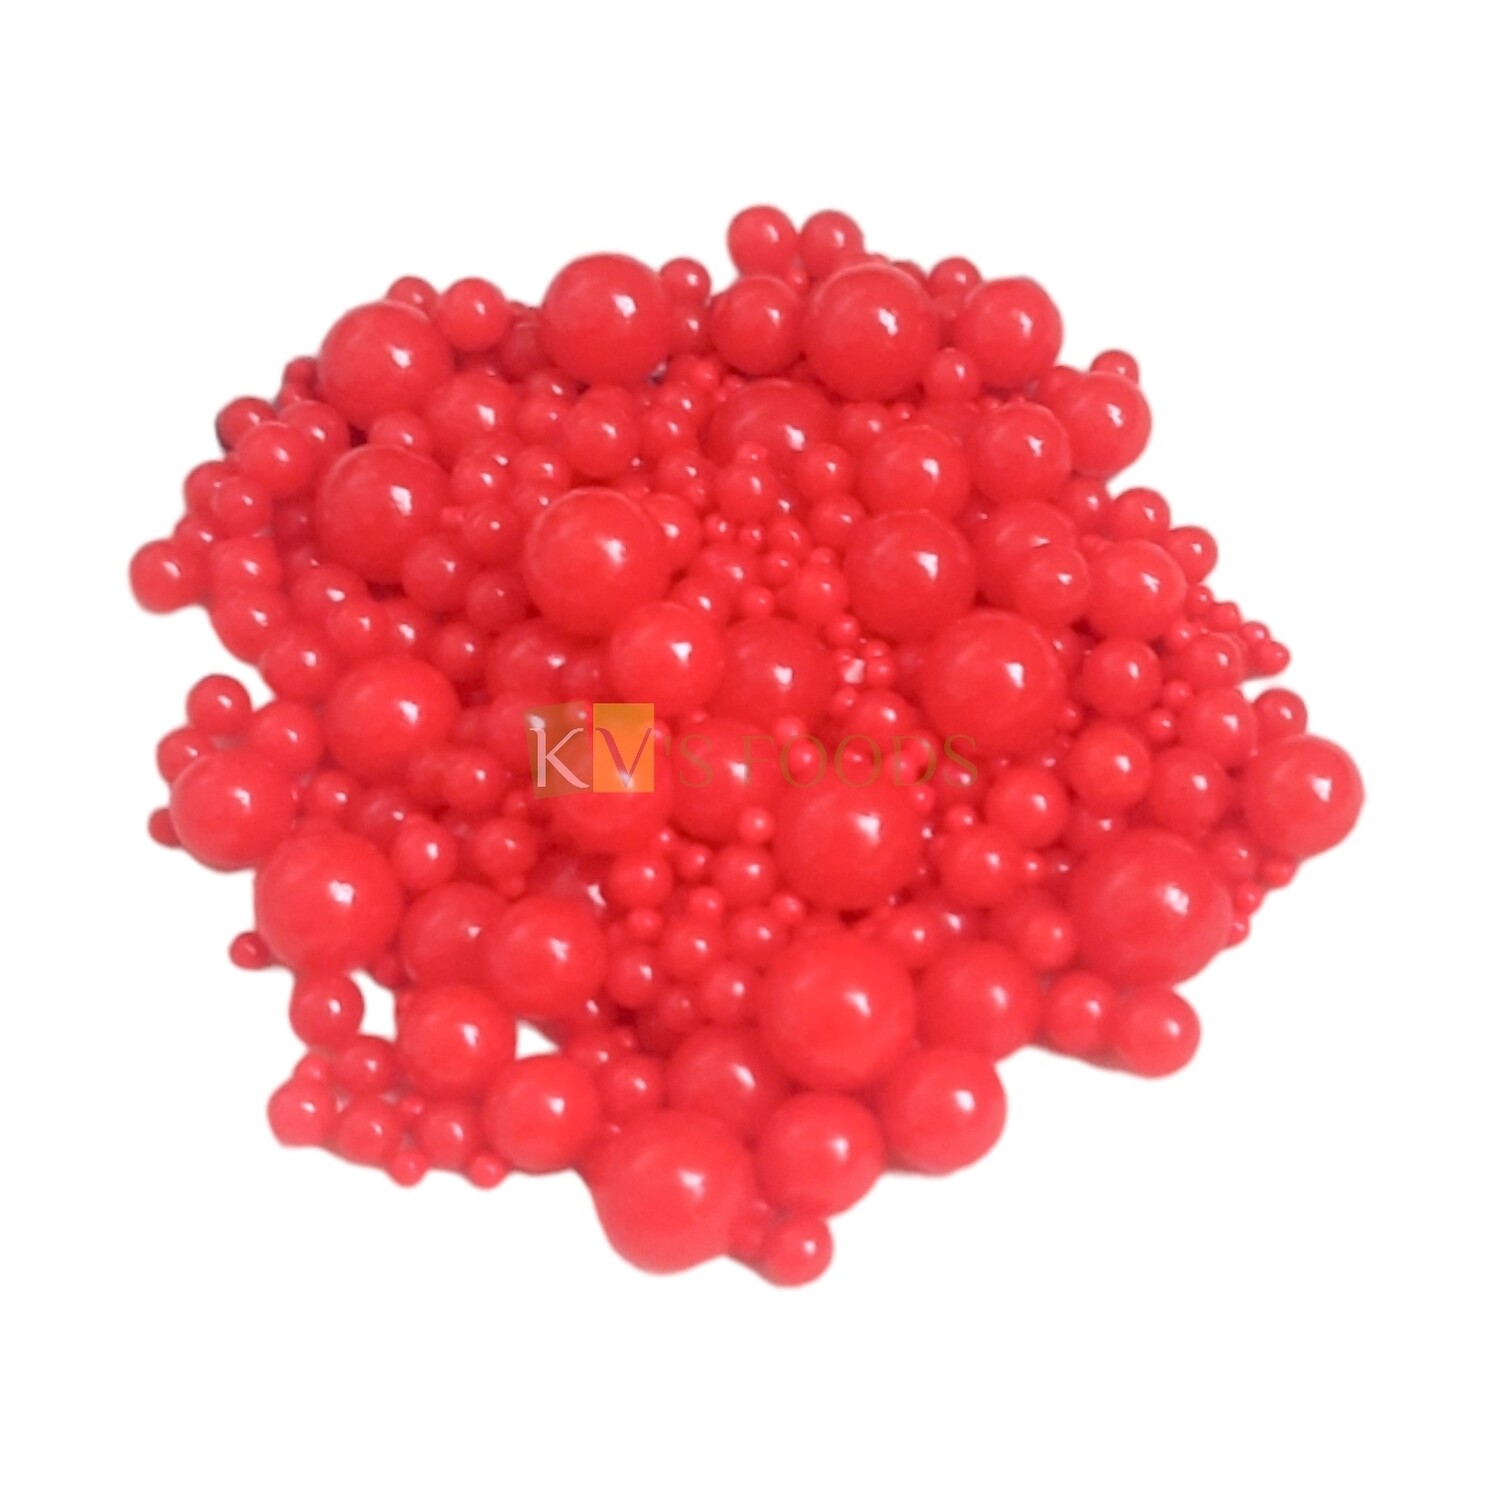 Red Colour Pearl Shiny Mixed Size Moti Sugar Balls, Circle Shaped Edible Sprinkles Confetti Decorative Toppings for Birthday Doughnuts, Ice-Creams Cakepops Cakesicles DIY Cake Decorations